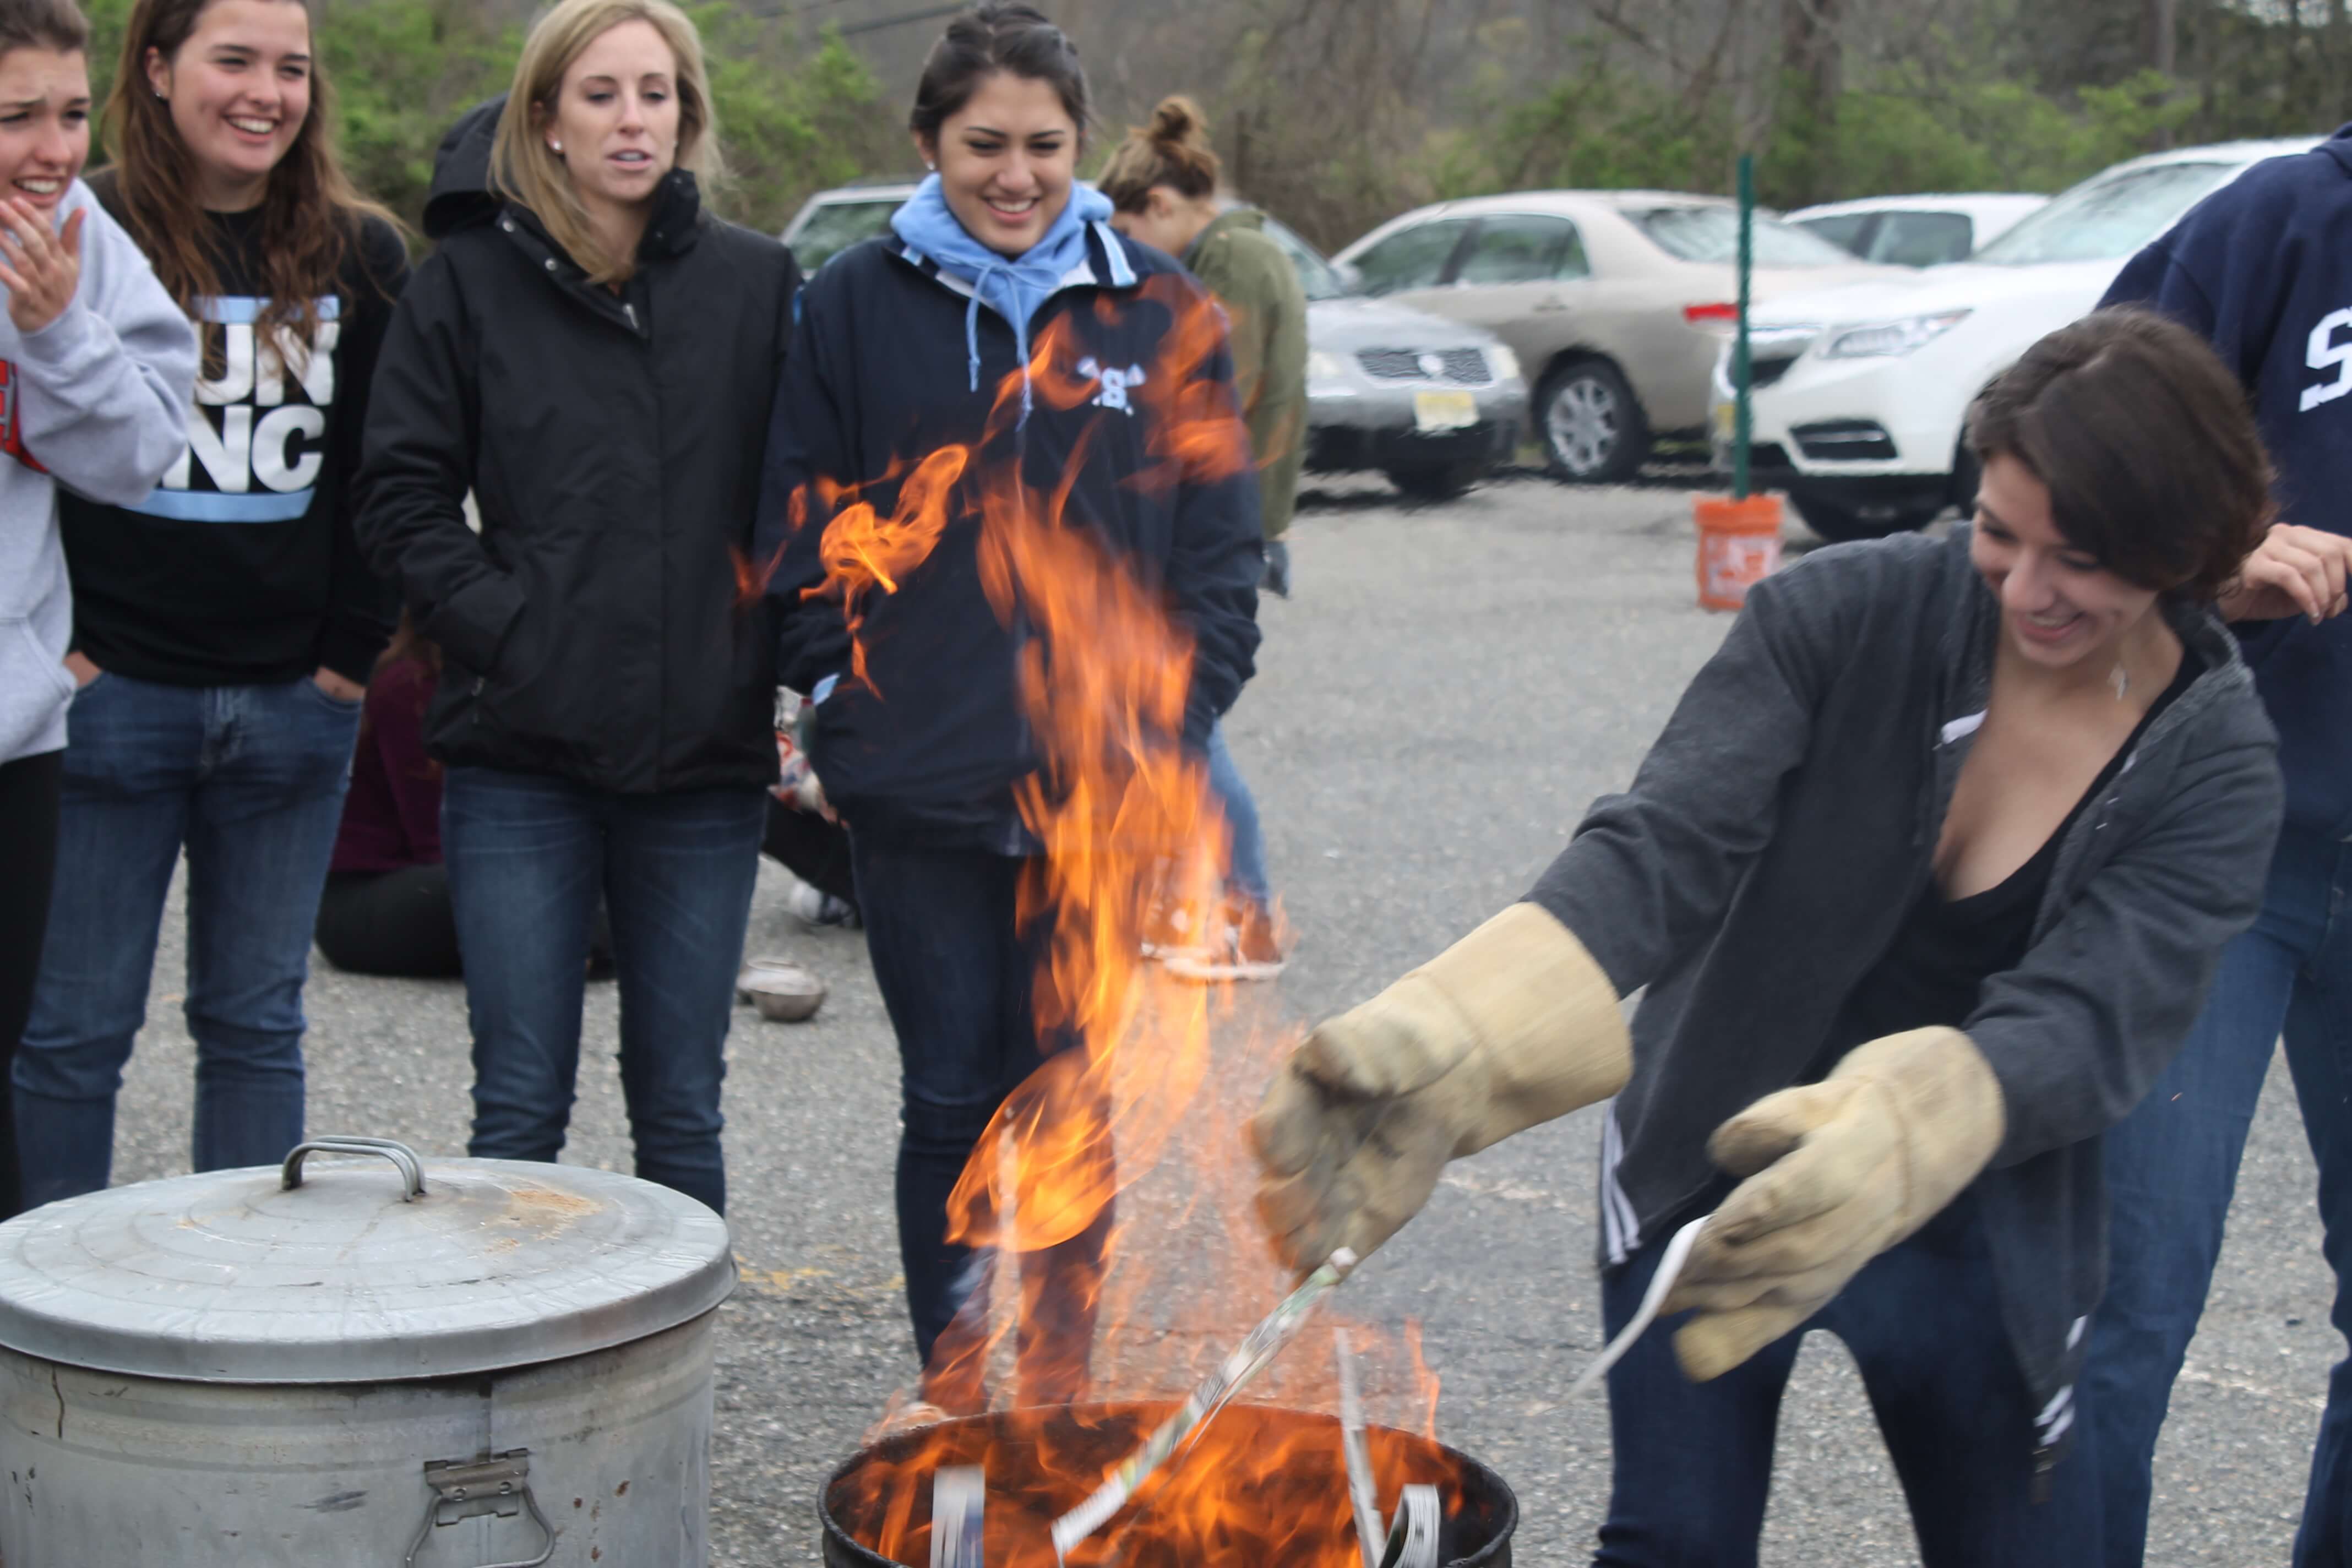 Four high school girls are watching as another girl lowers her raku clay piece into a trash can full of burning newspaper. Everyone is wearing winter coats and smiling. 